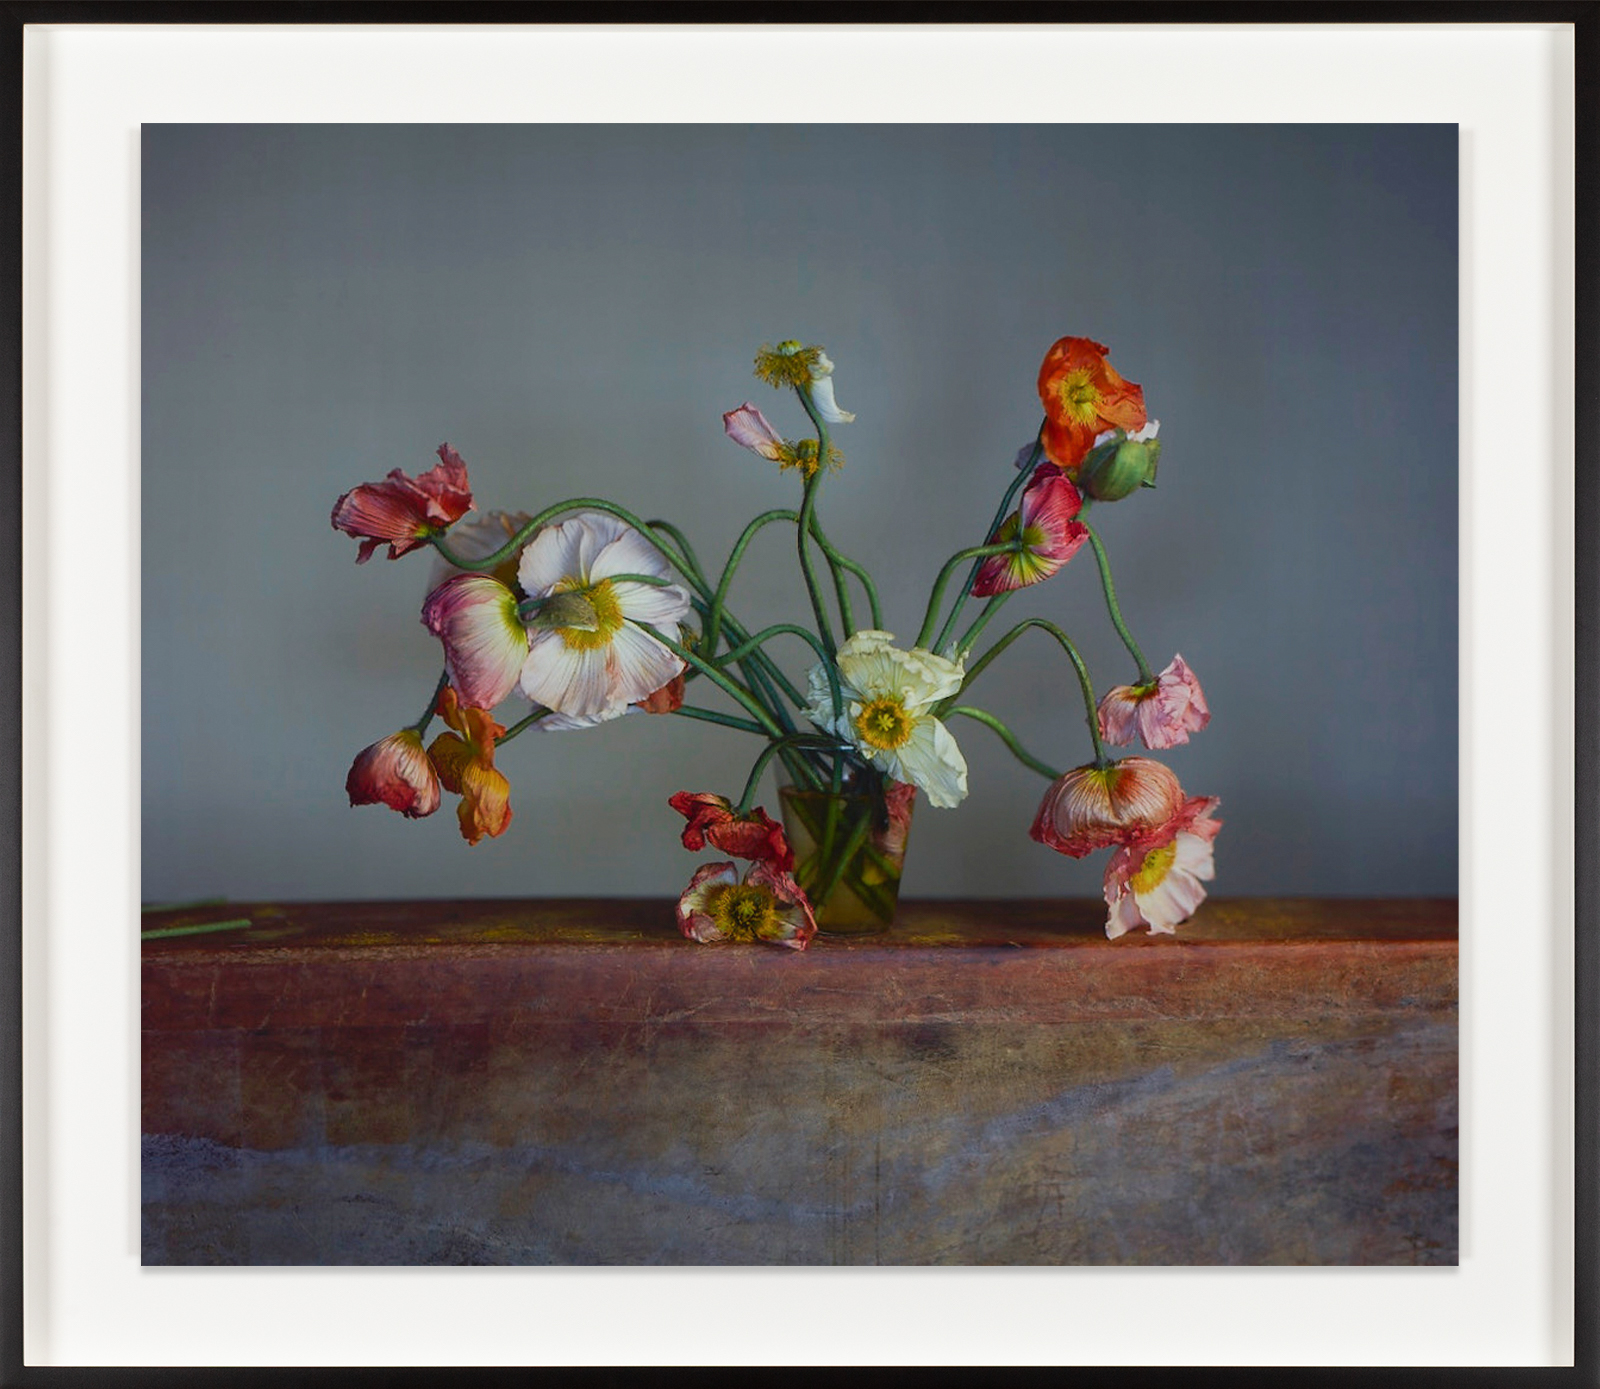 Color photograph depicting several poppies in states of decay on metal plinth framed in black